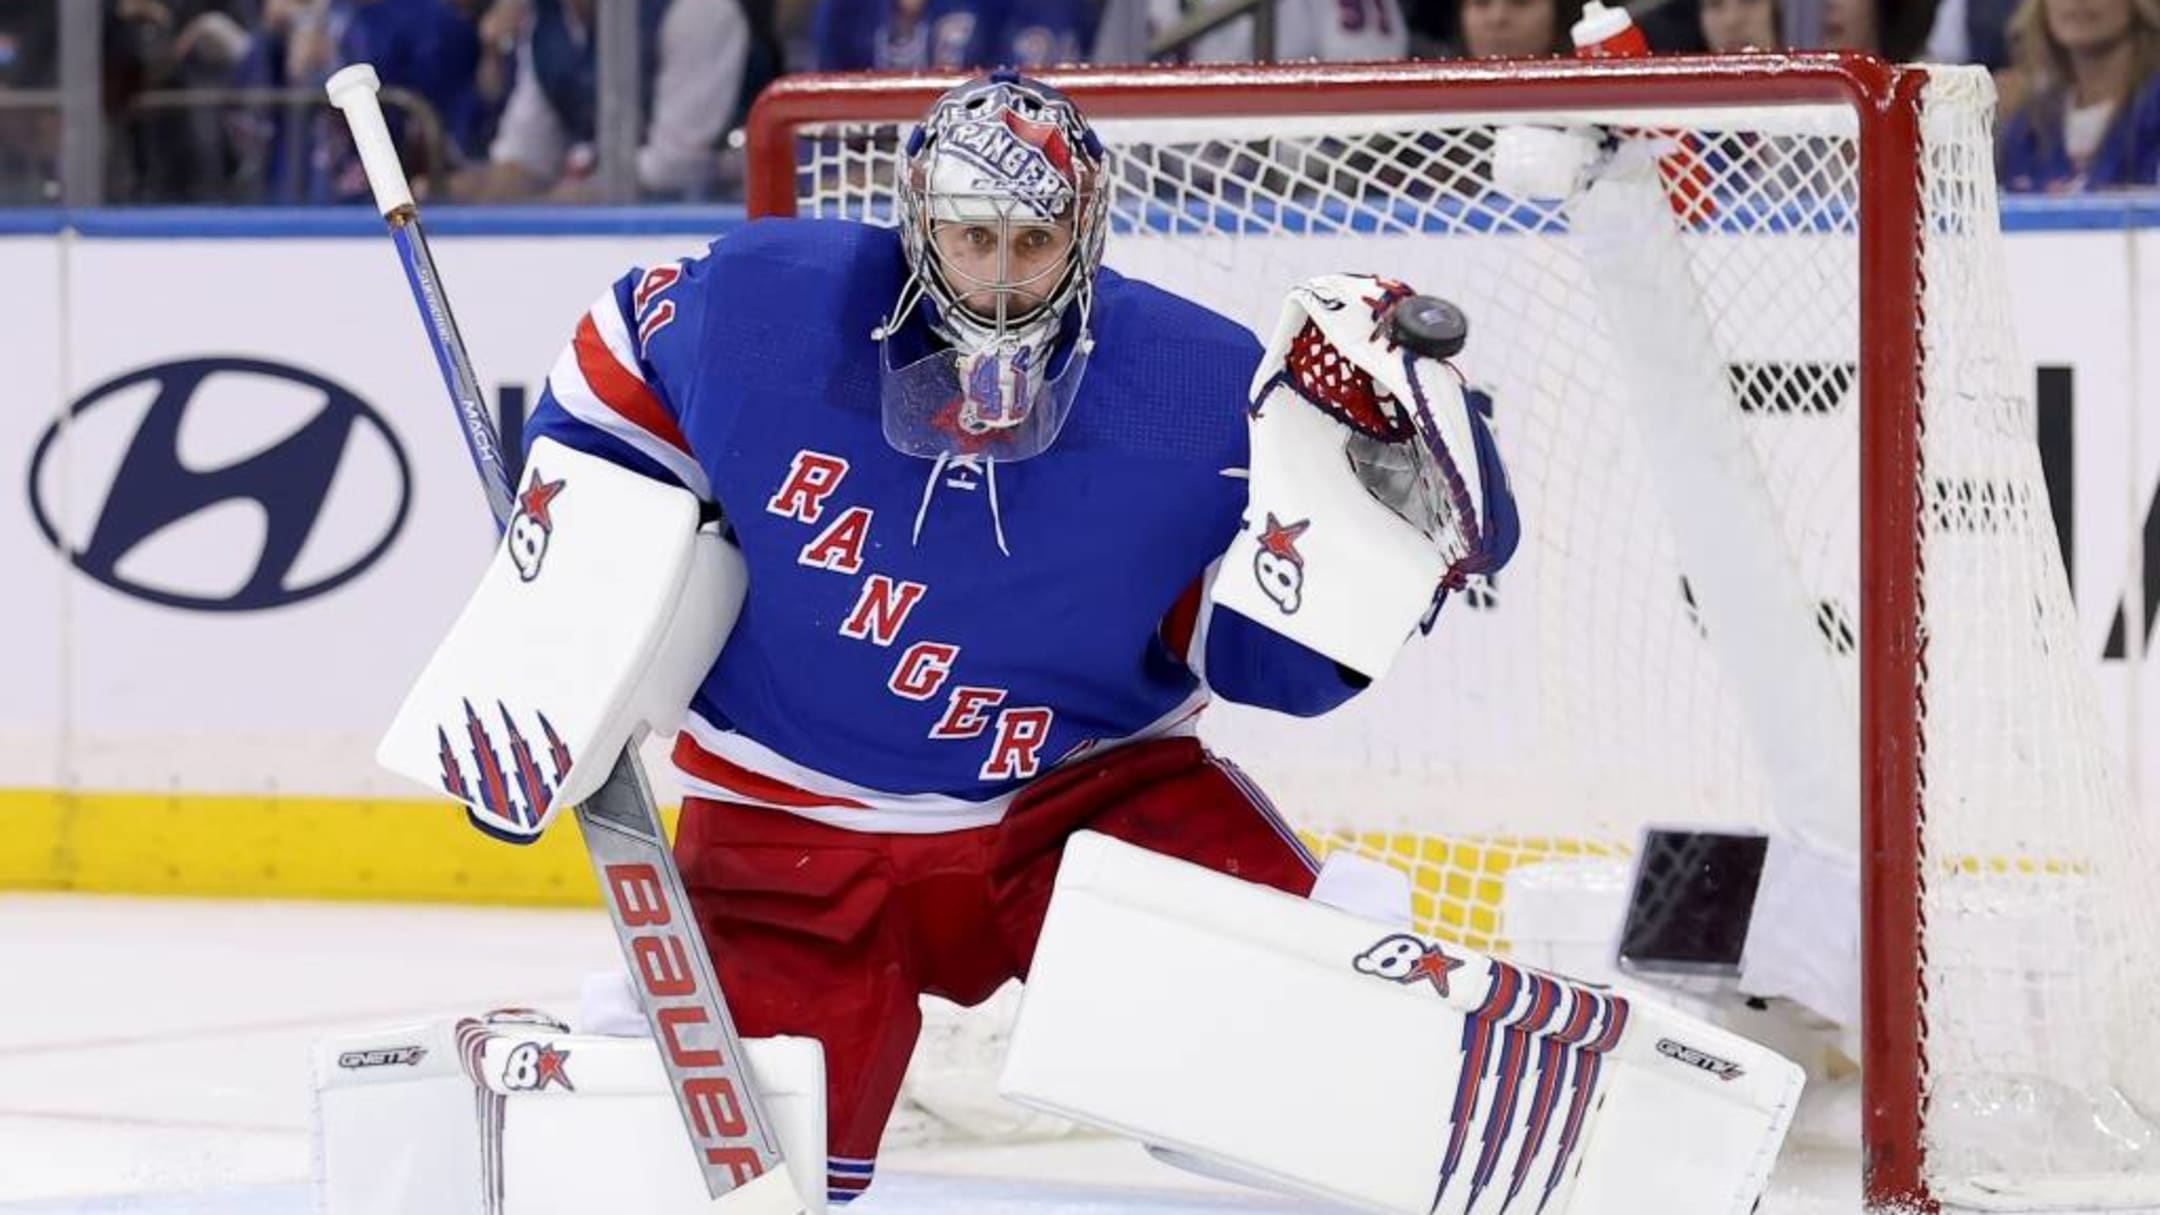 Rangers vs. Devils live stream: TV channel, how to watch